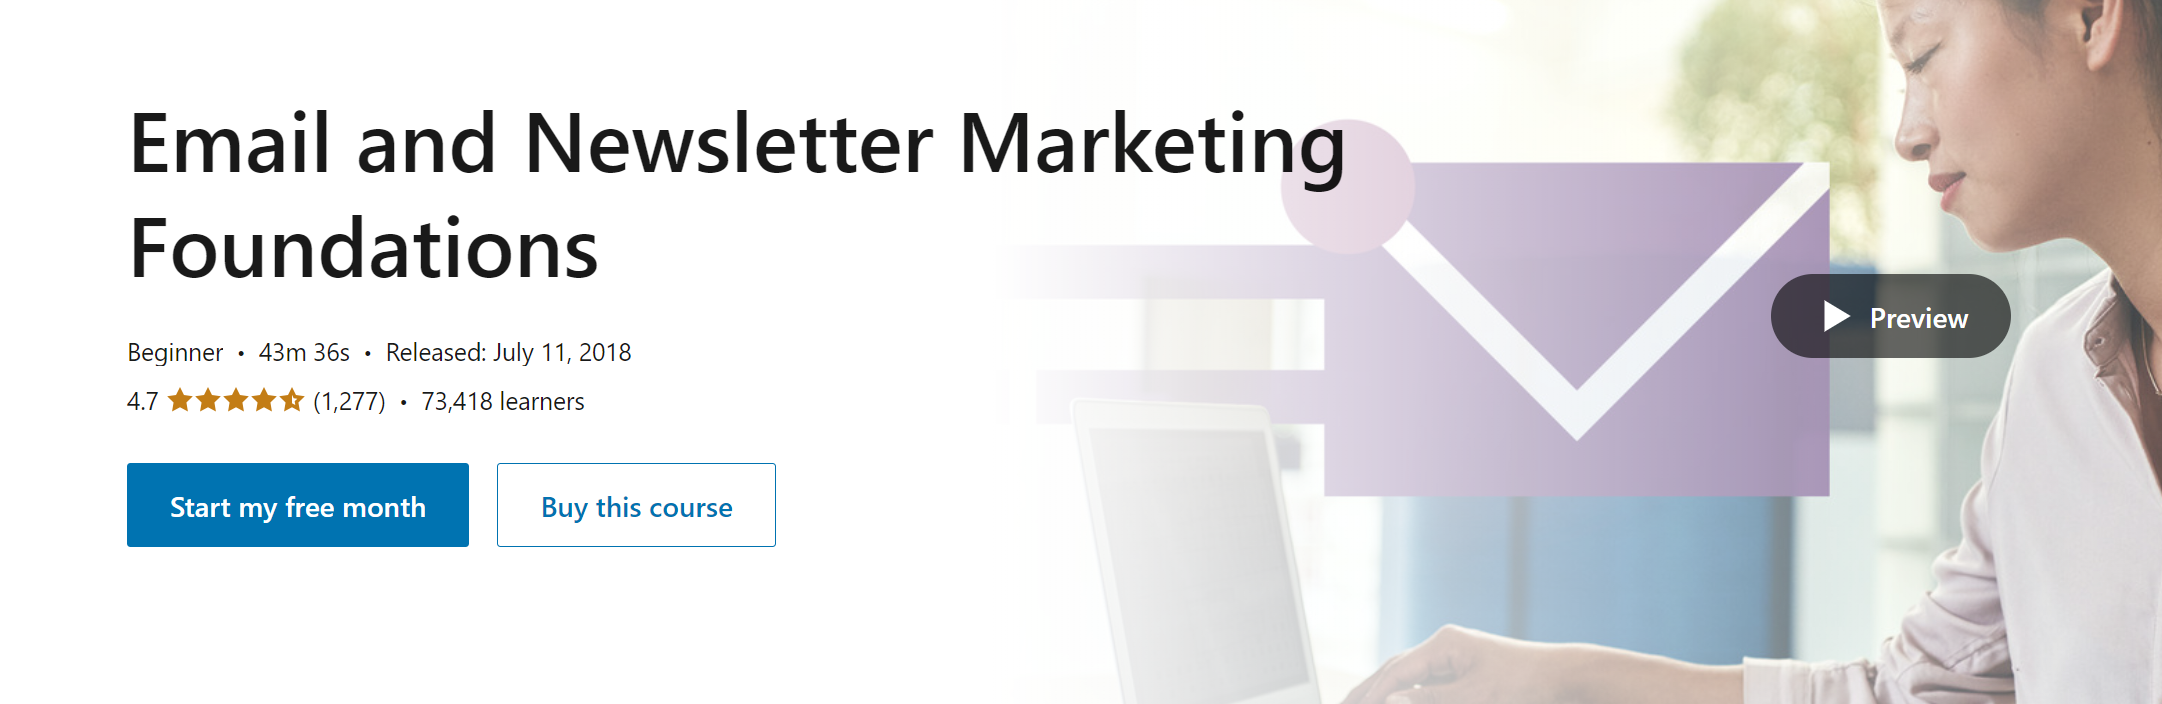 Email and Newsletter Marketing Foundations via LinkedIn Learning